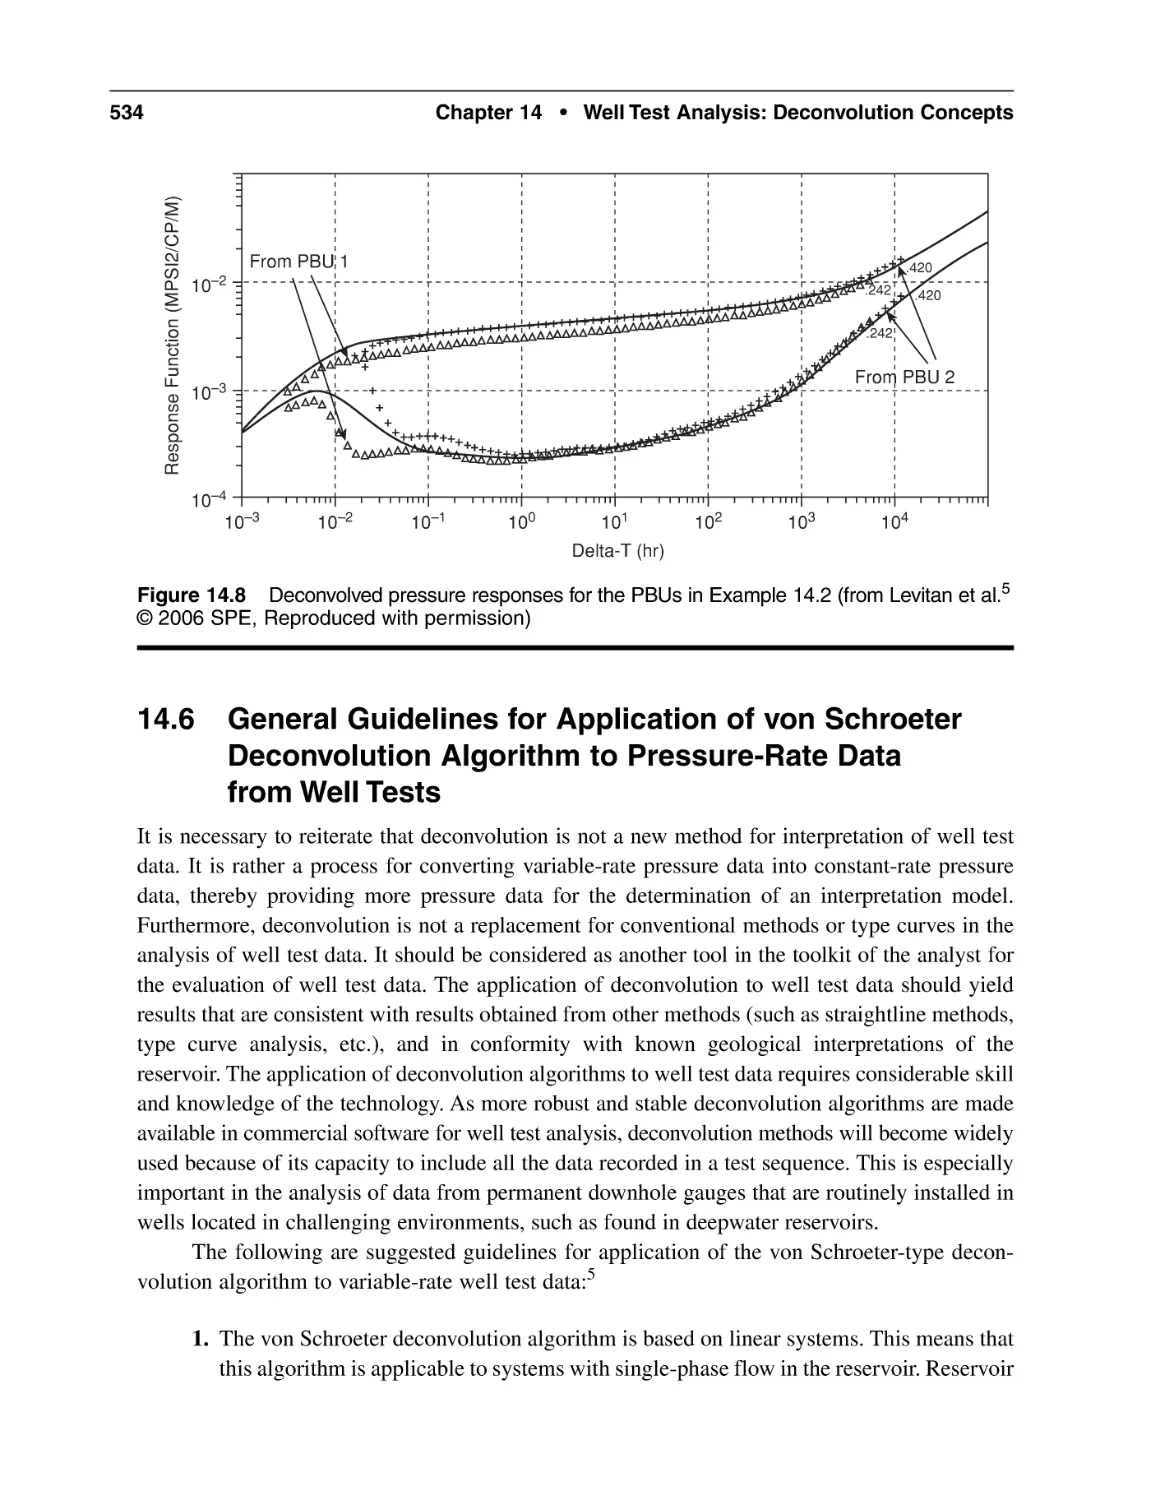 14.6 General Guidelines for Application of von Schroeter Deconvolution Algorithm to Pressure-Rate Datafrom Well Tests